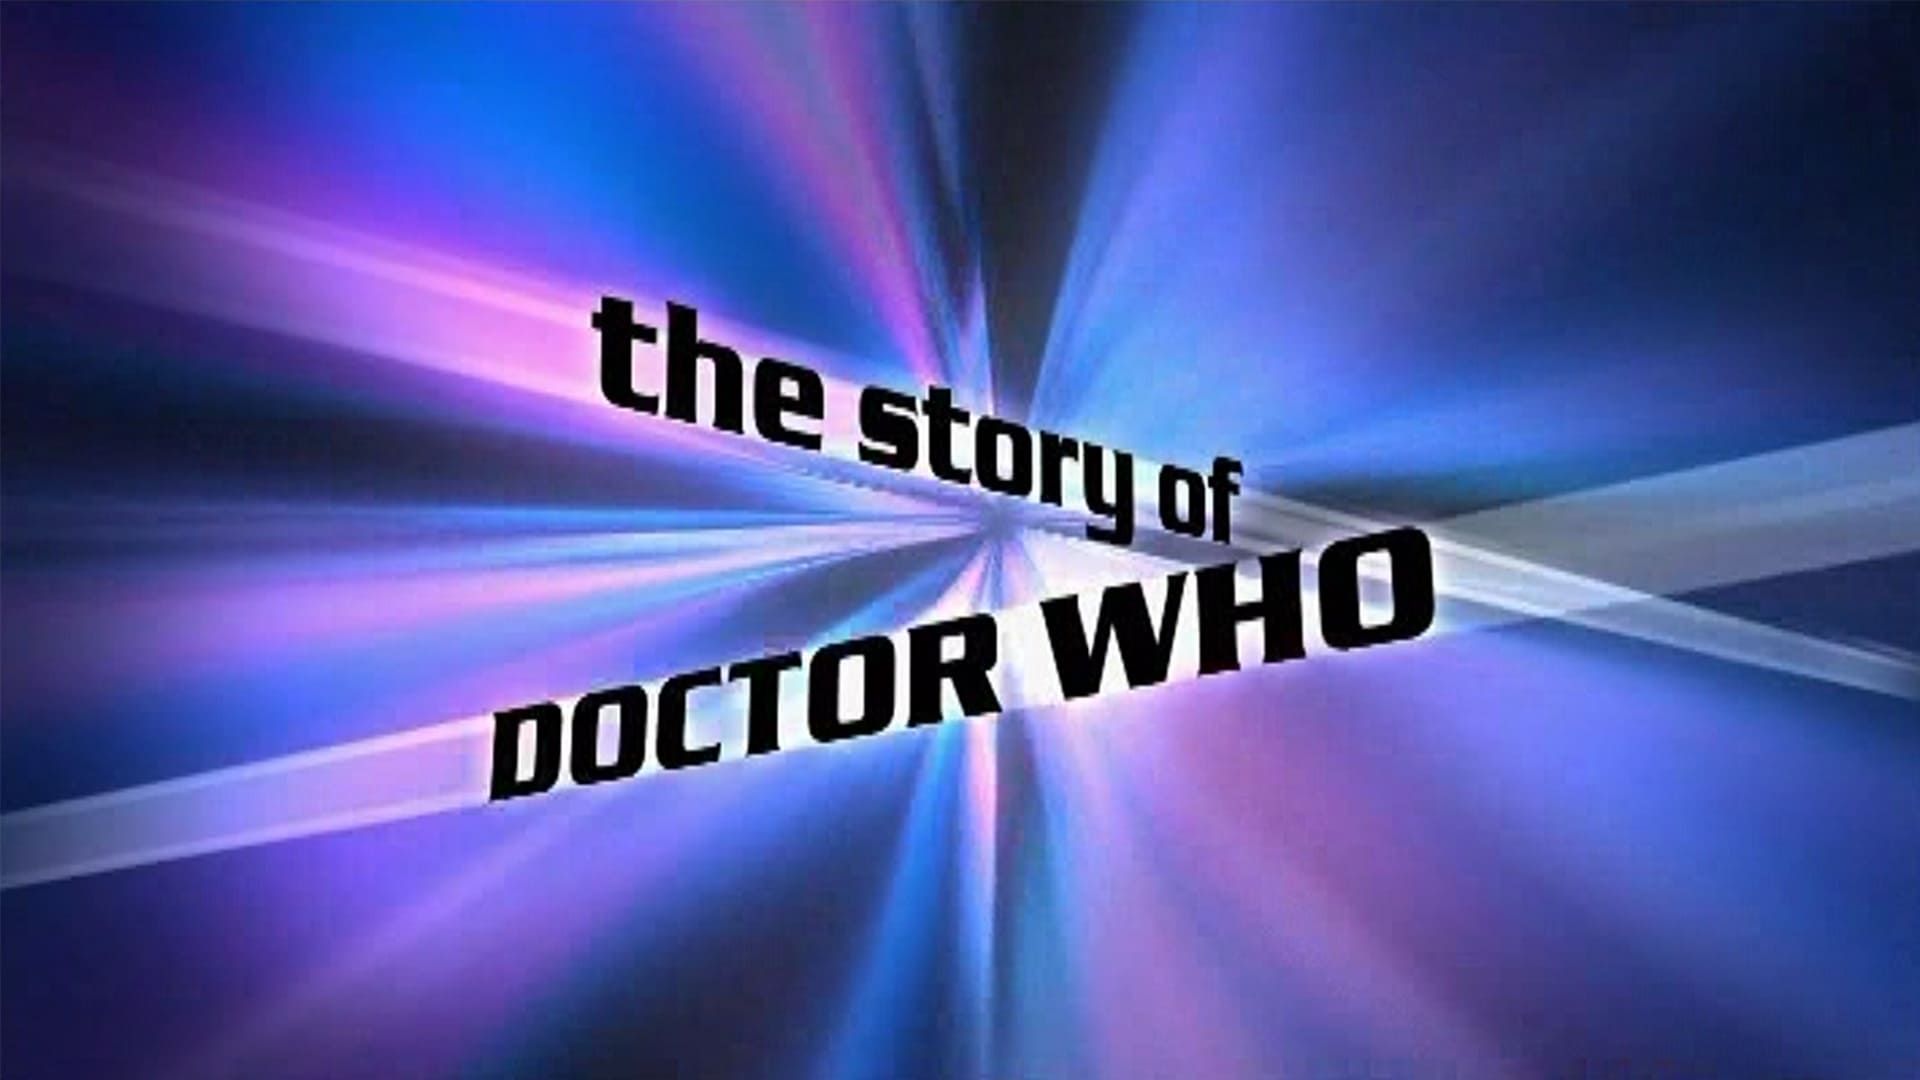 The Story of 'Doctor Who' background